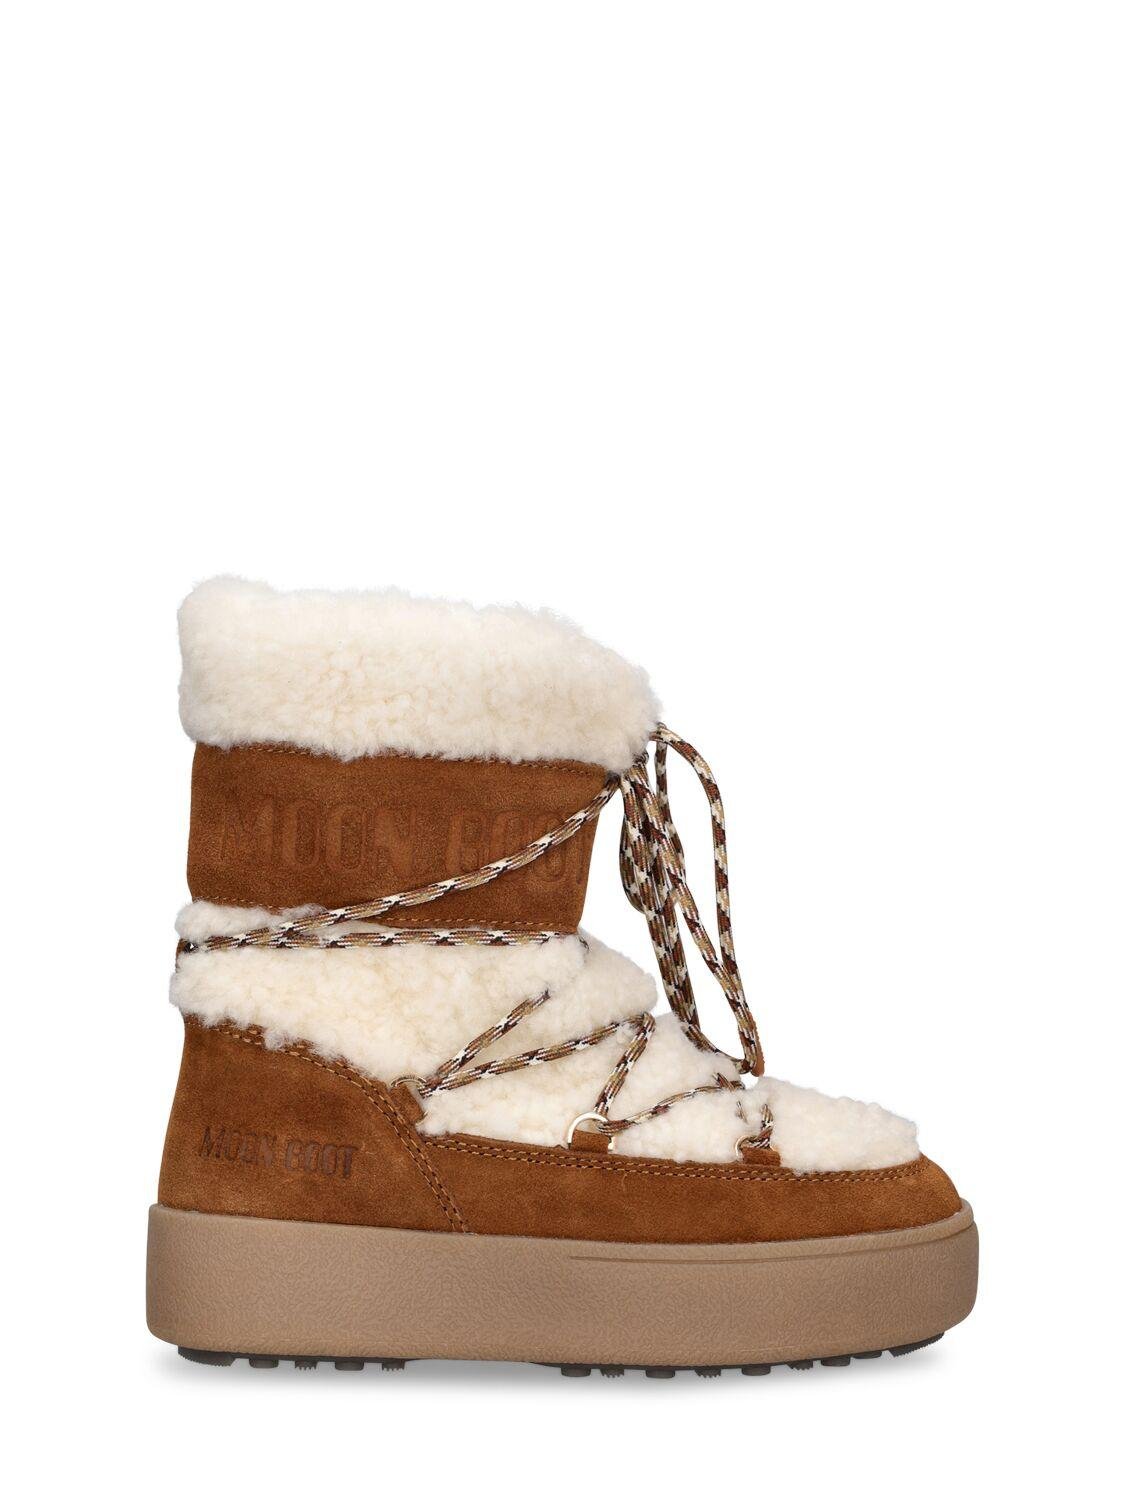 Shearling & Suede Ankle Snow Boots by MOON BOOT